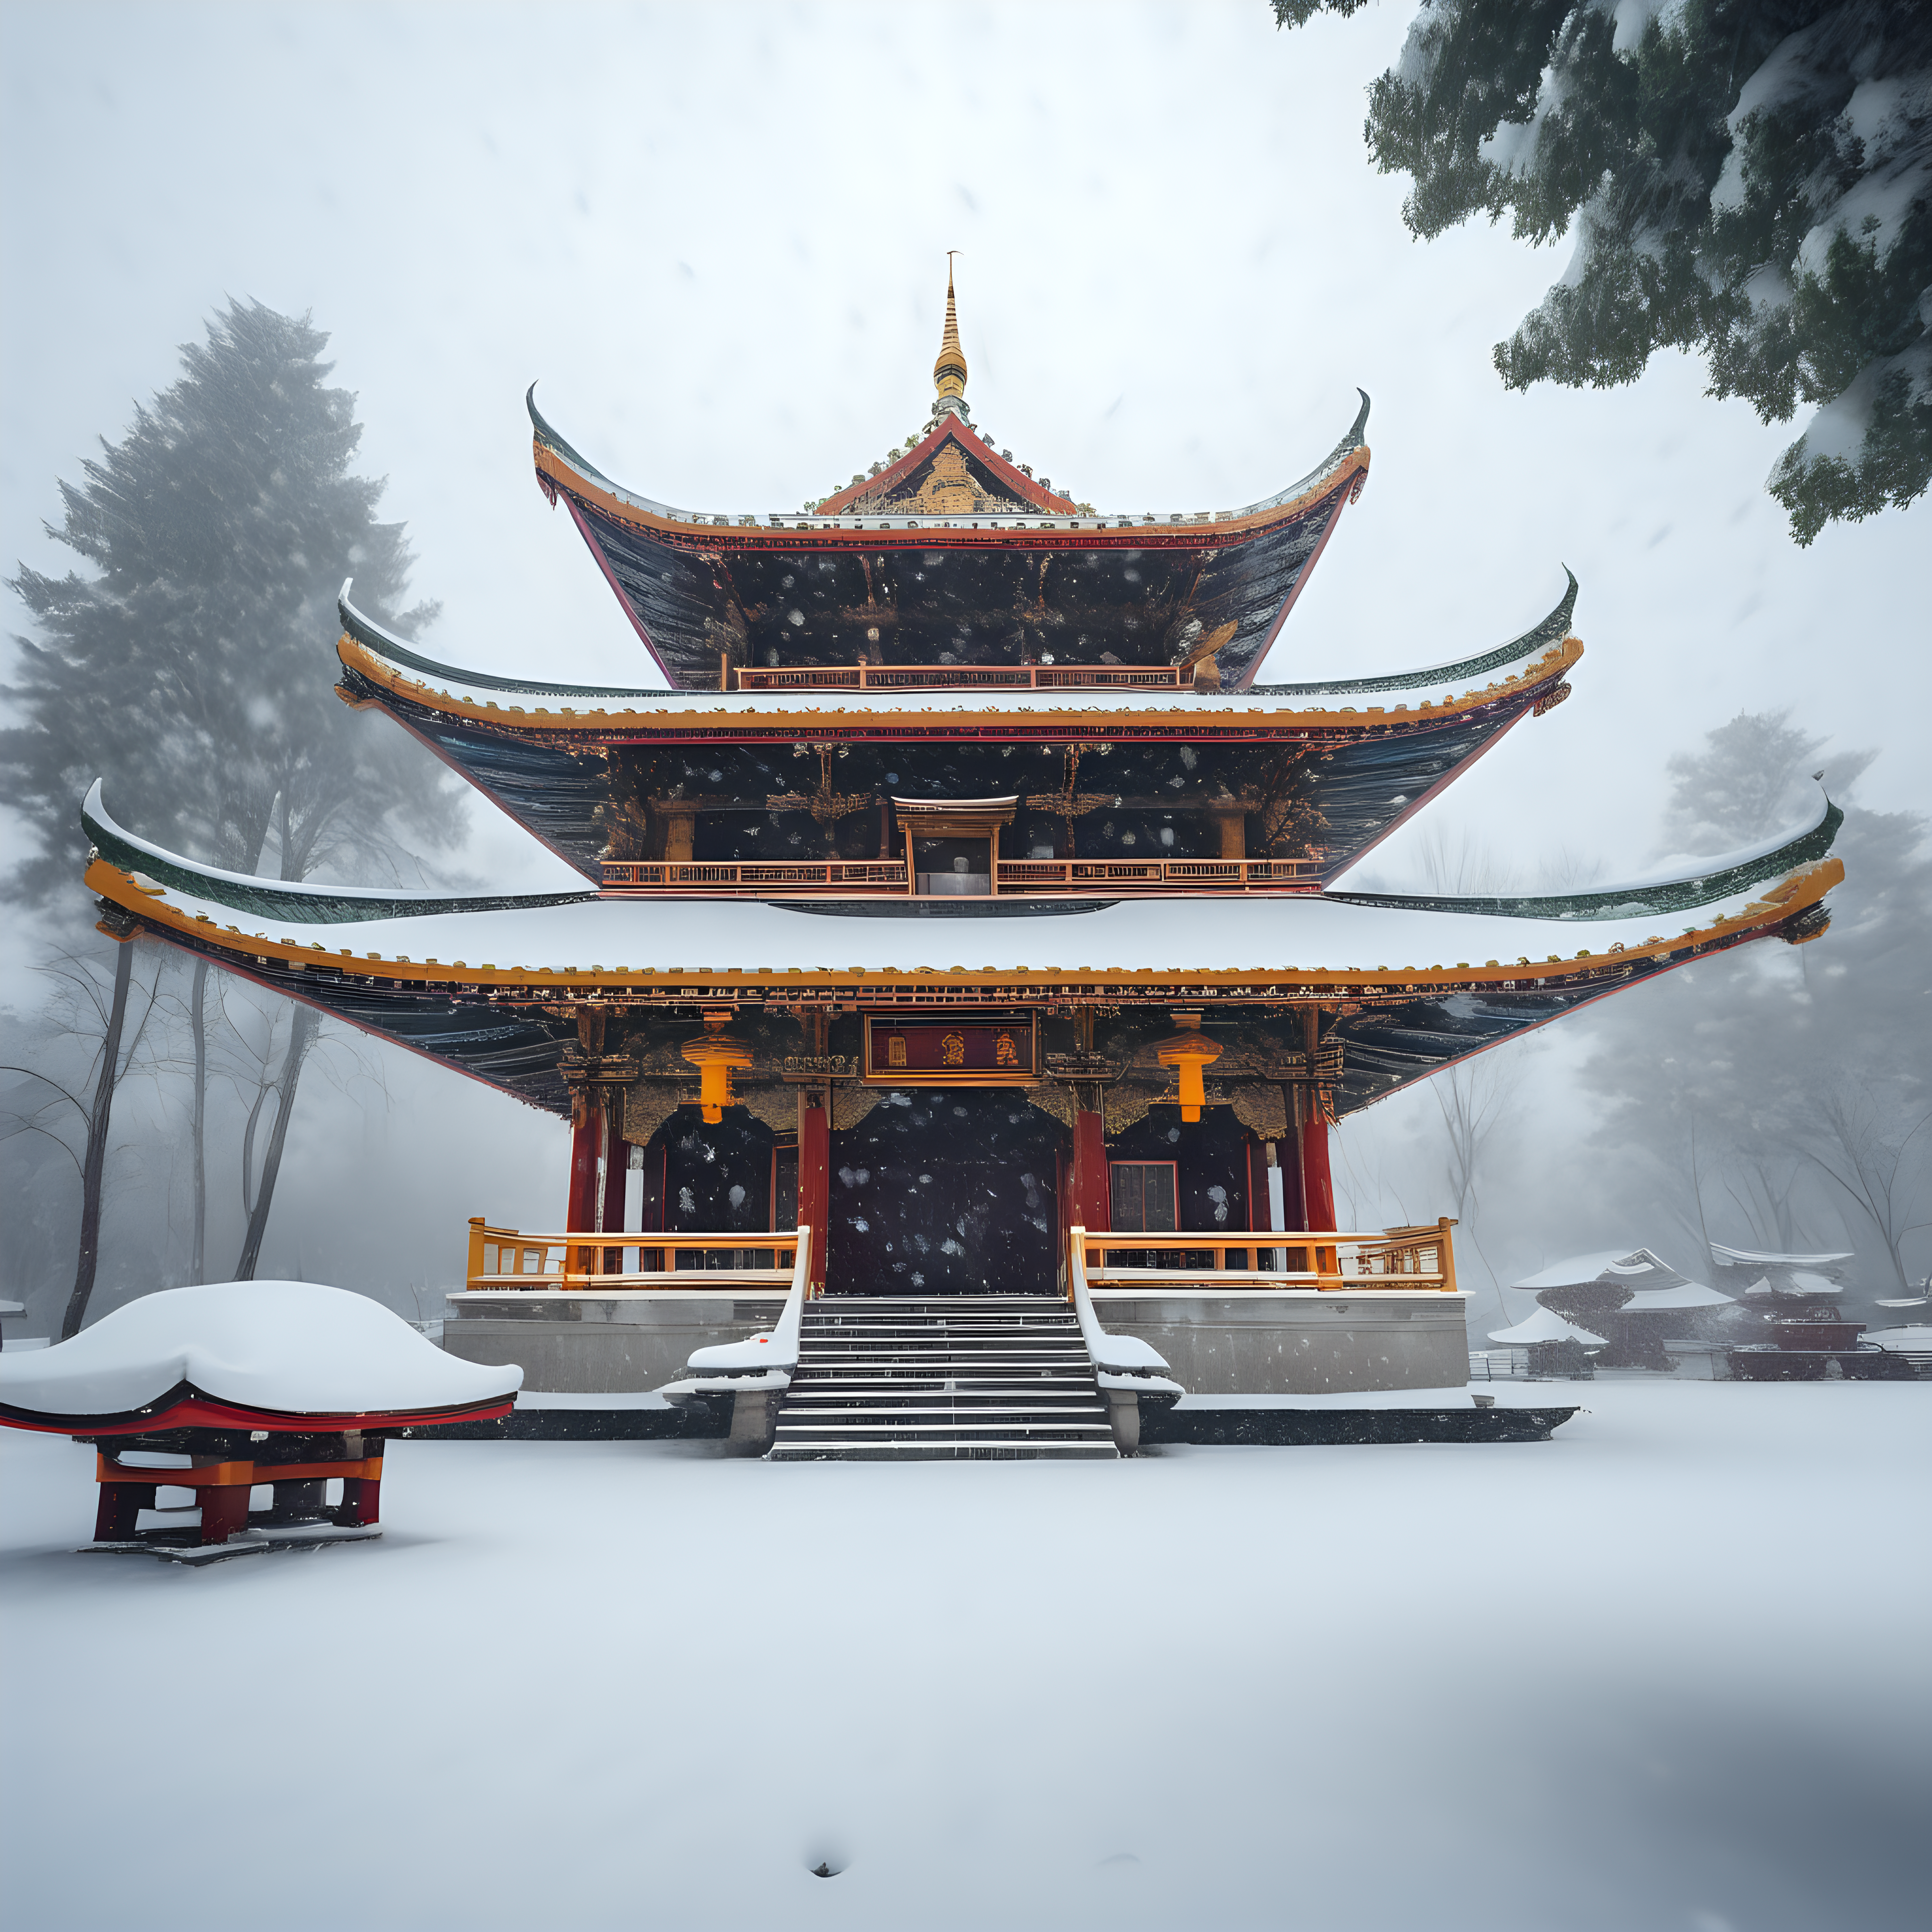 Buddhist temple in winter snow storm with flying